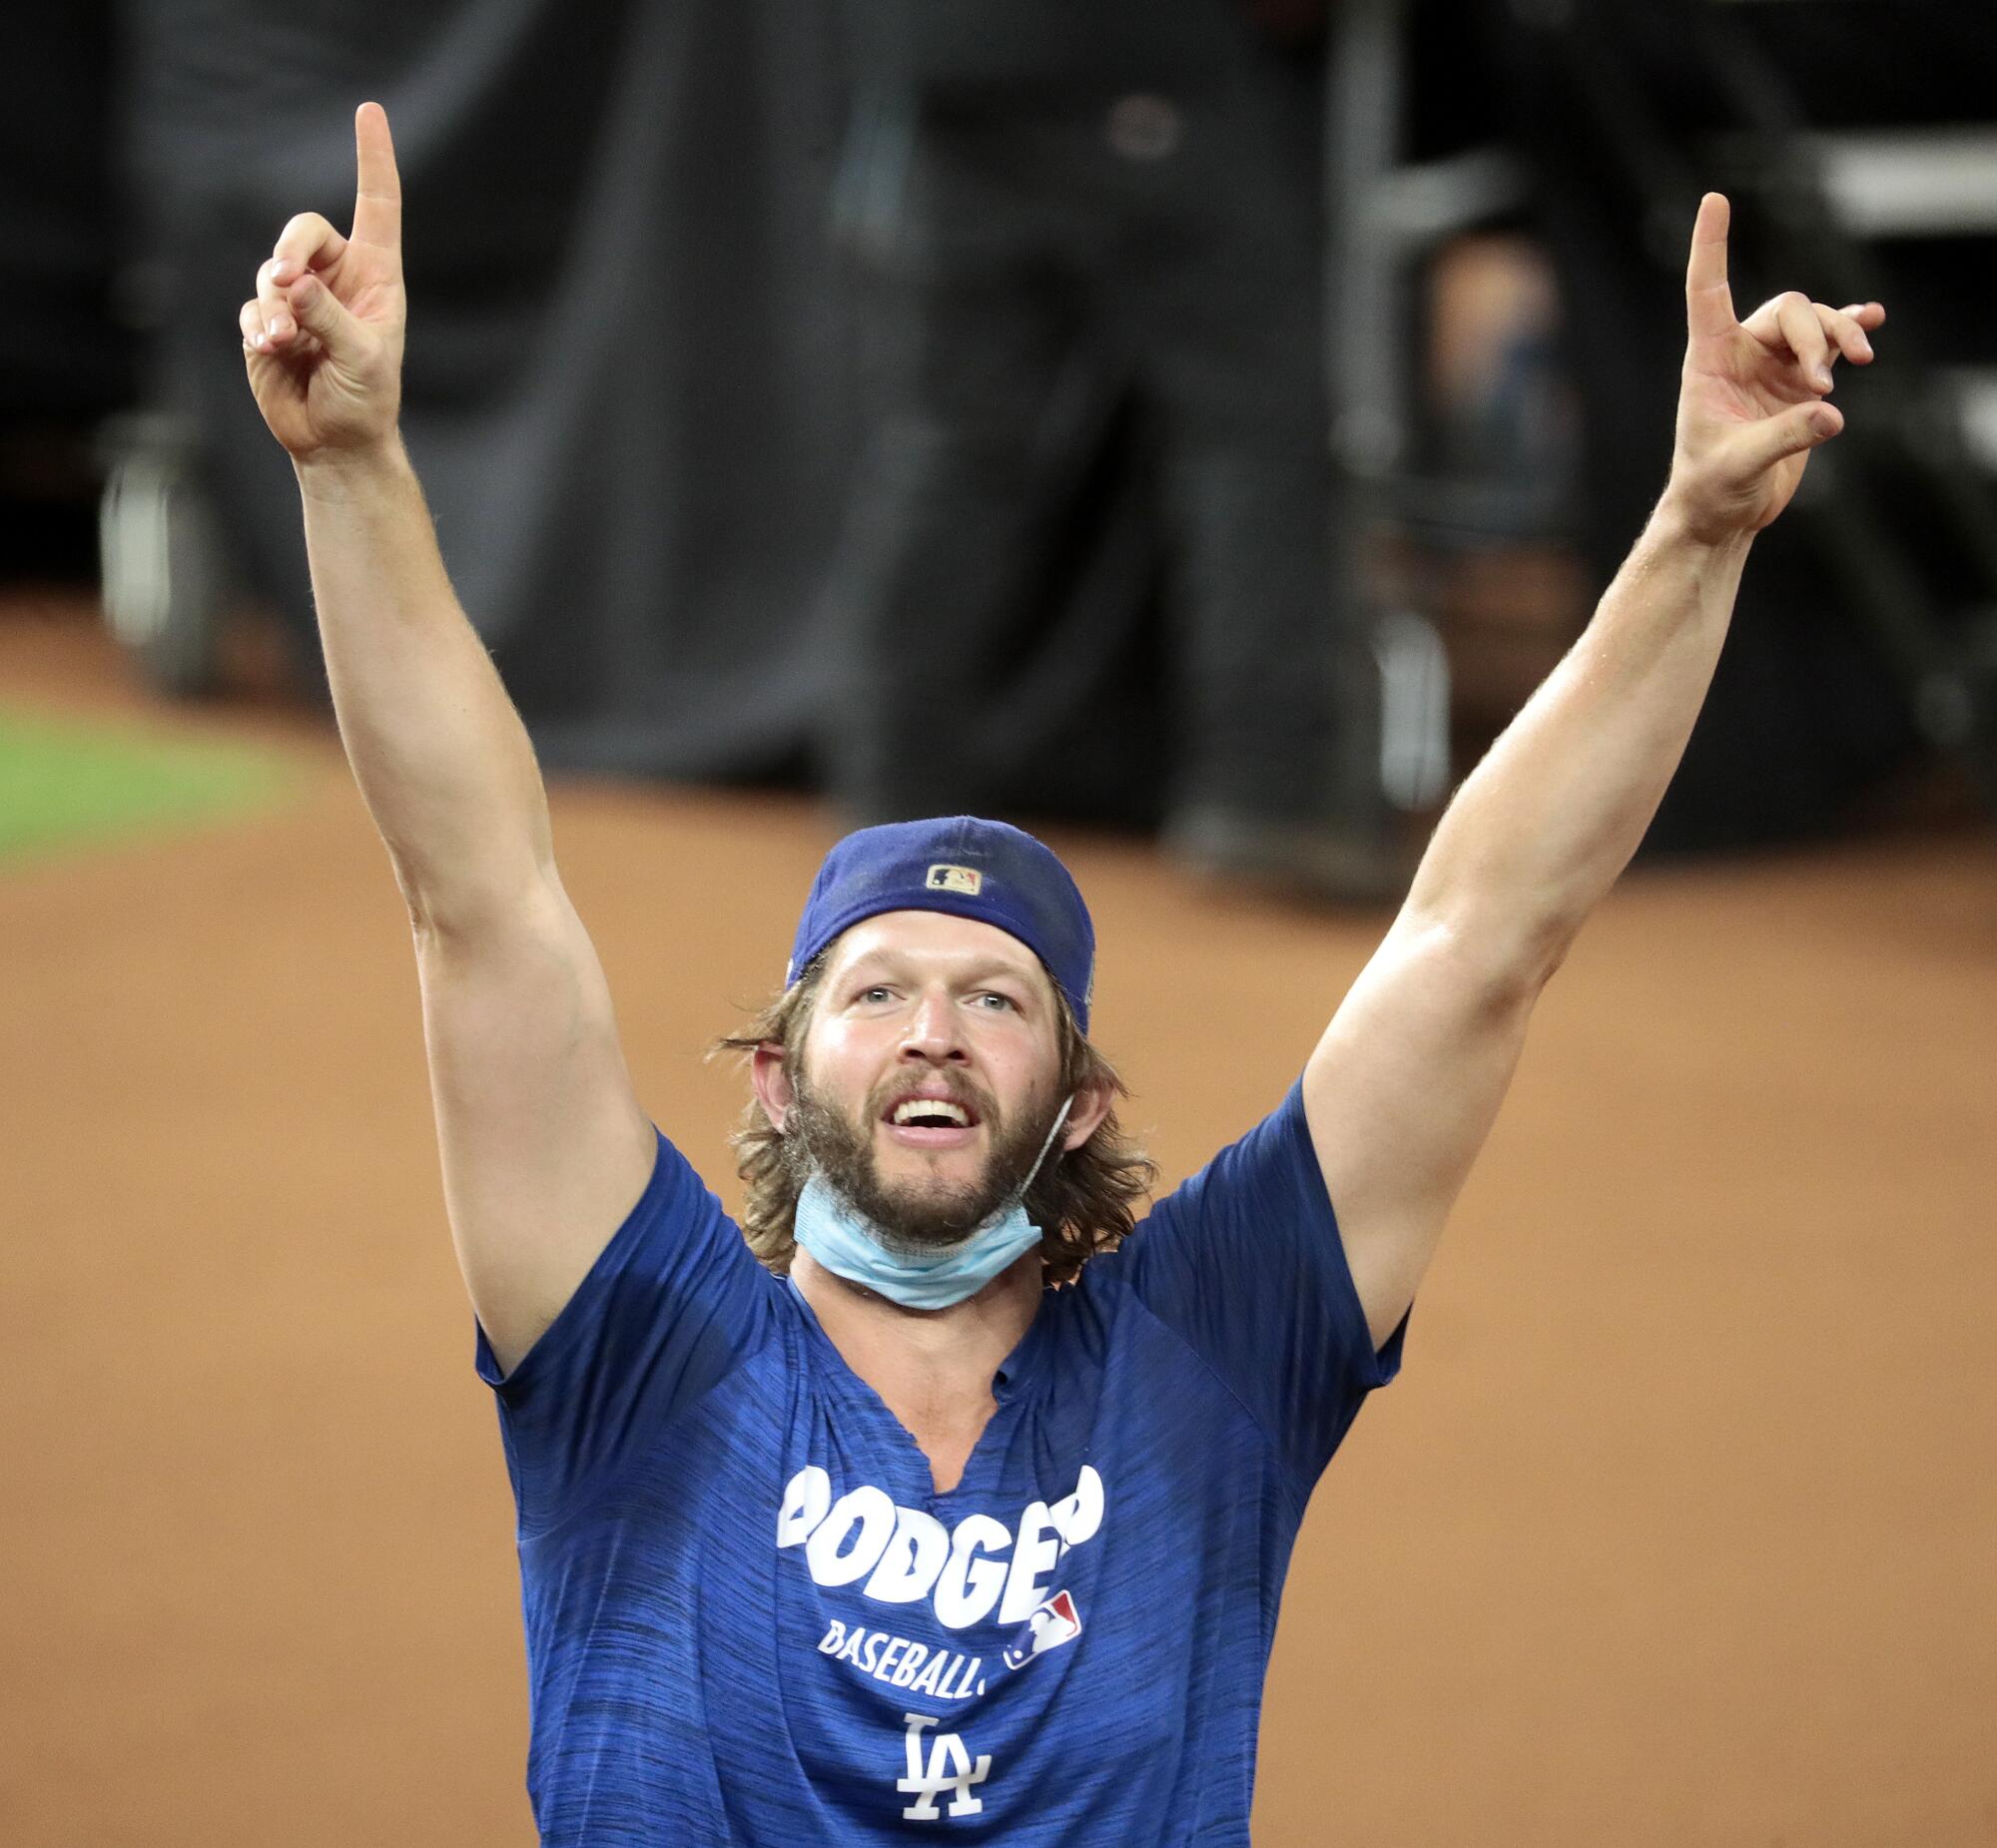 Clayton Kershaw runs onto the field with both arms raised.